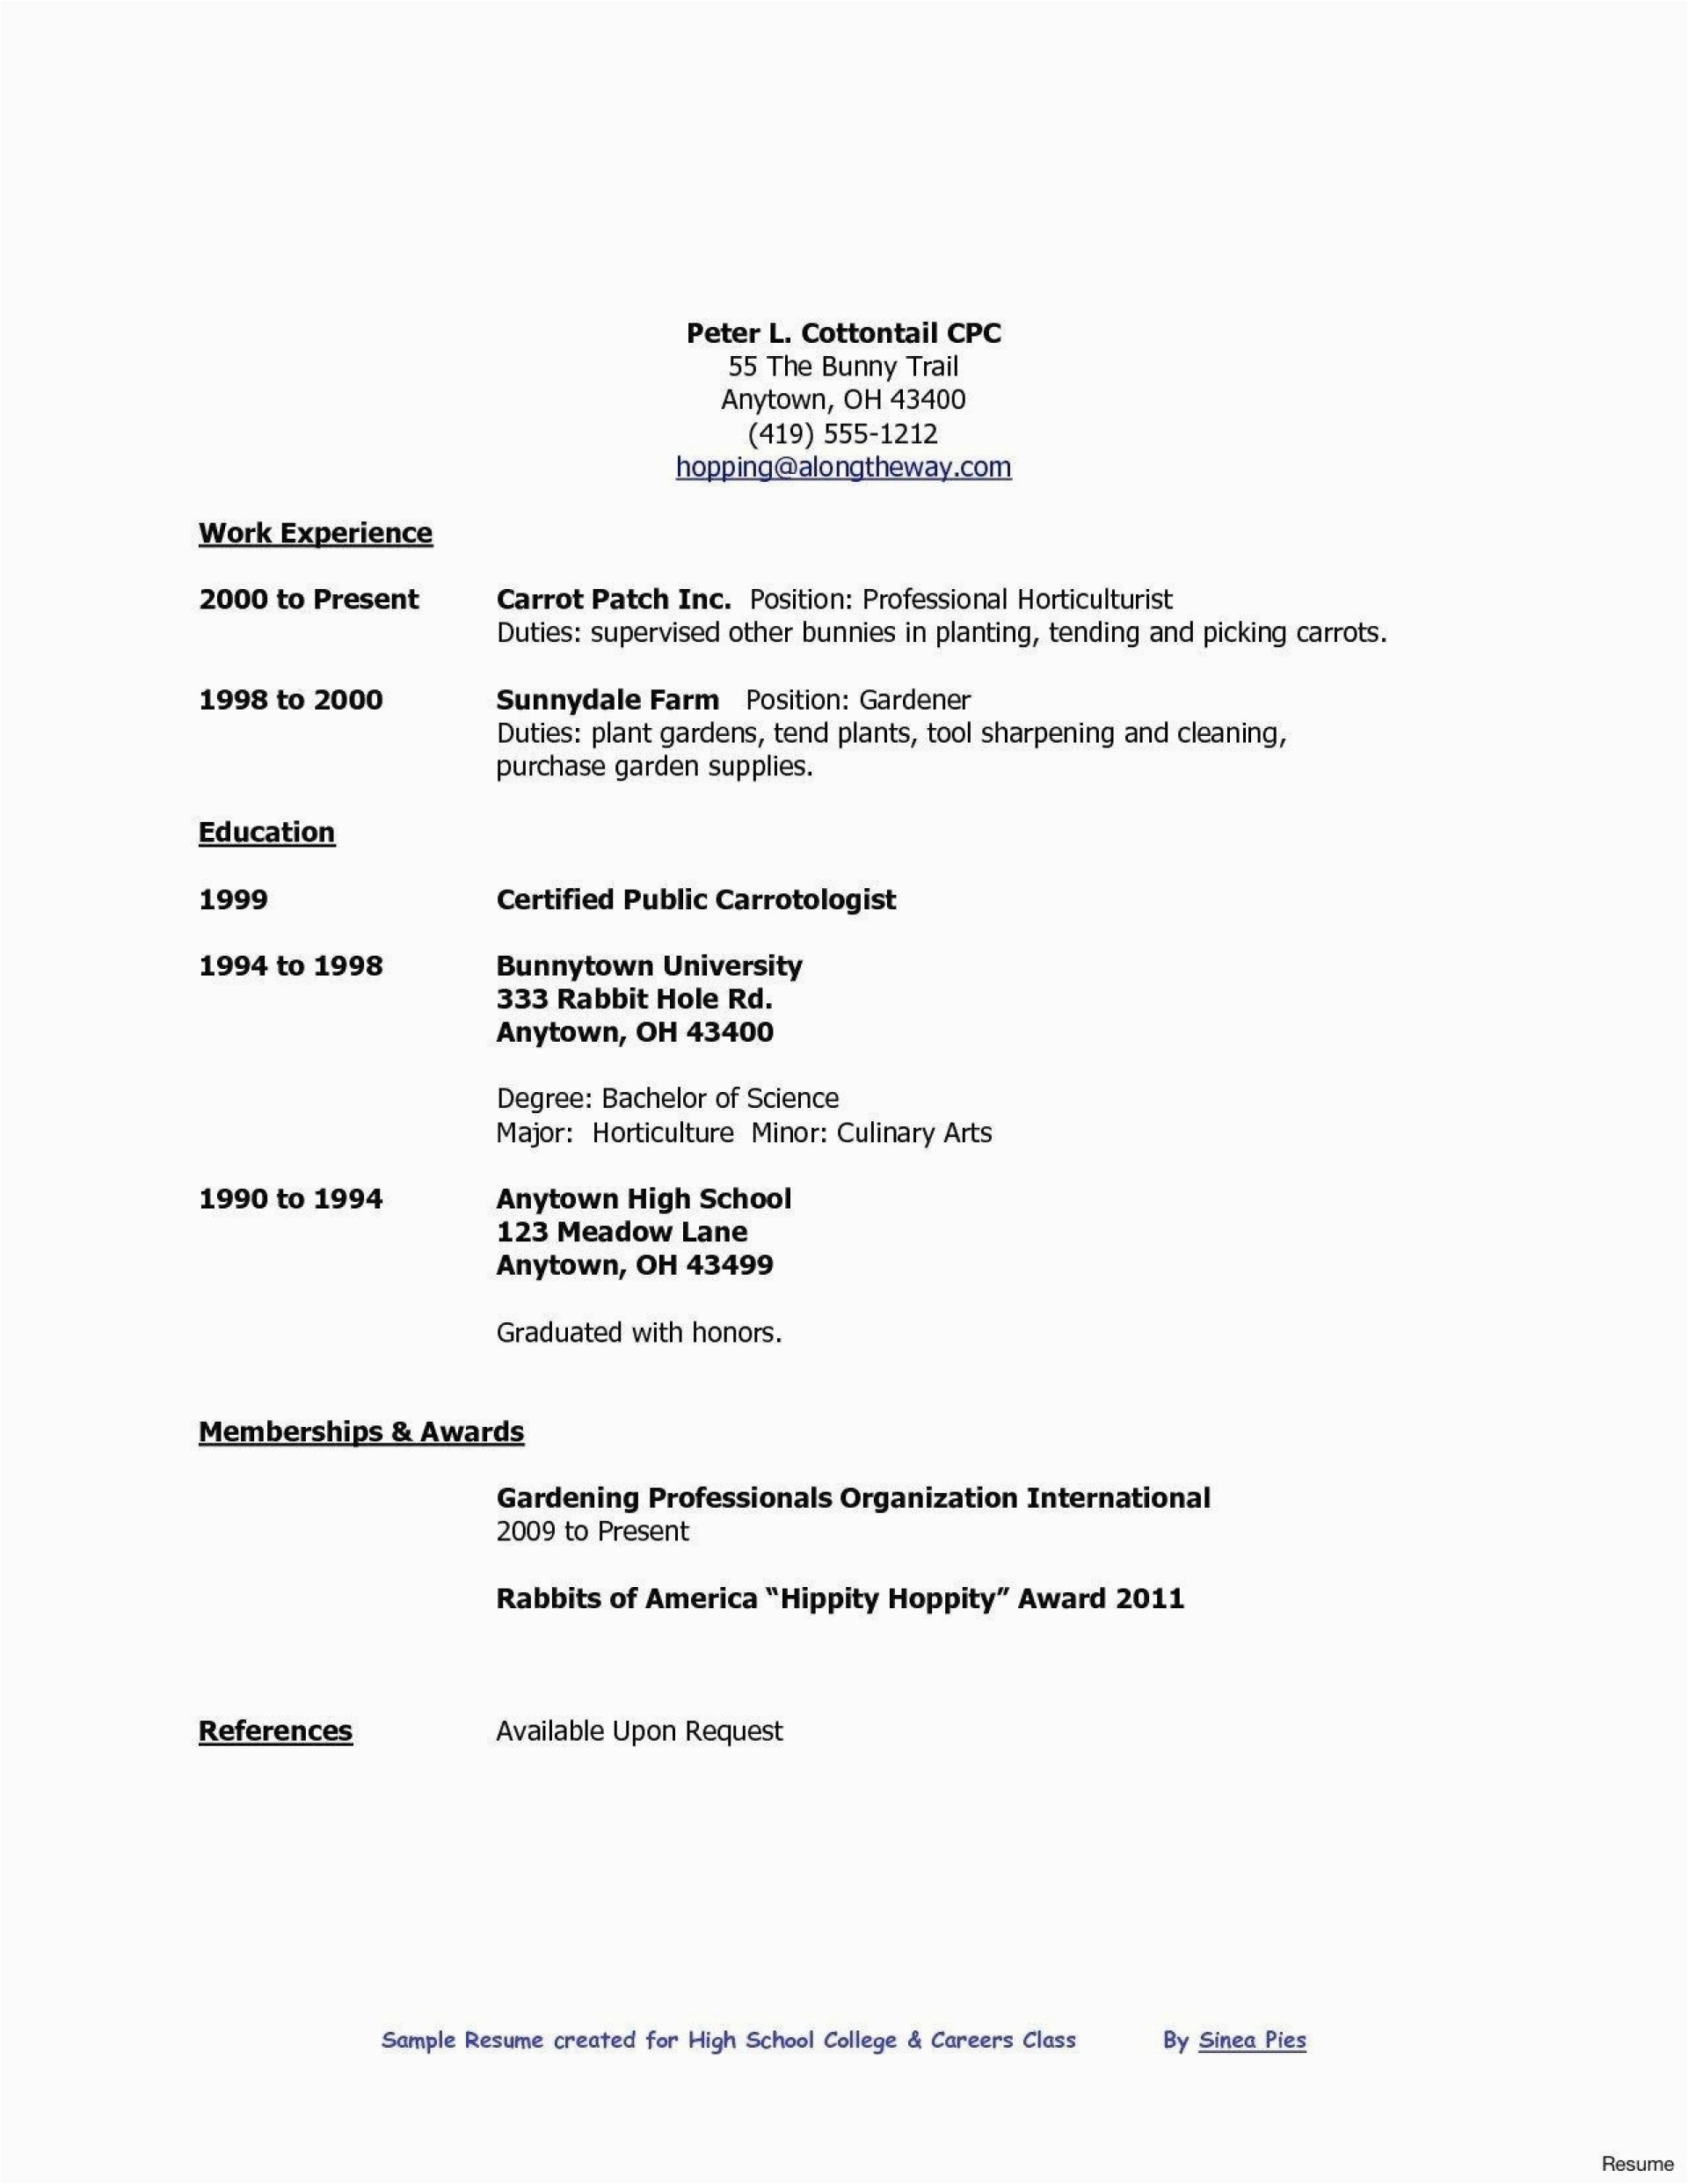 High School Resume No Work Experience Sample Grade 10 Teenager High School Student Resume with No Work